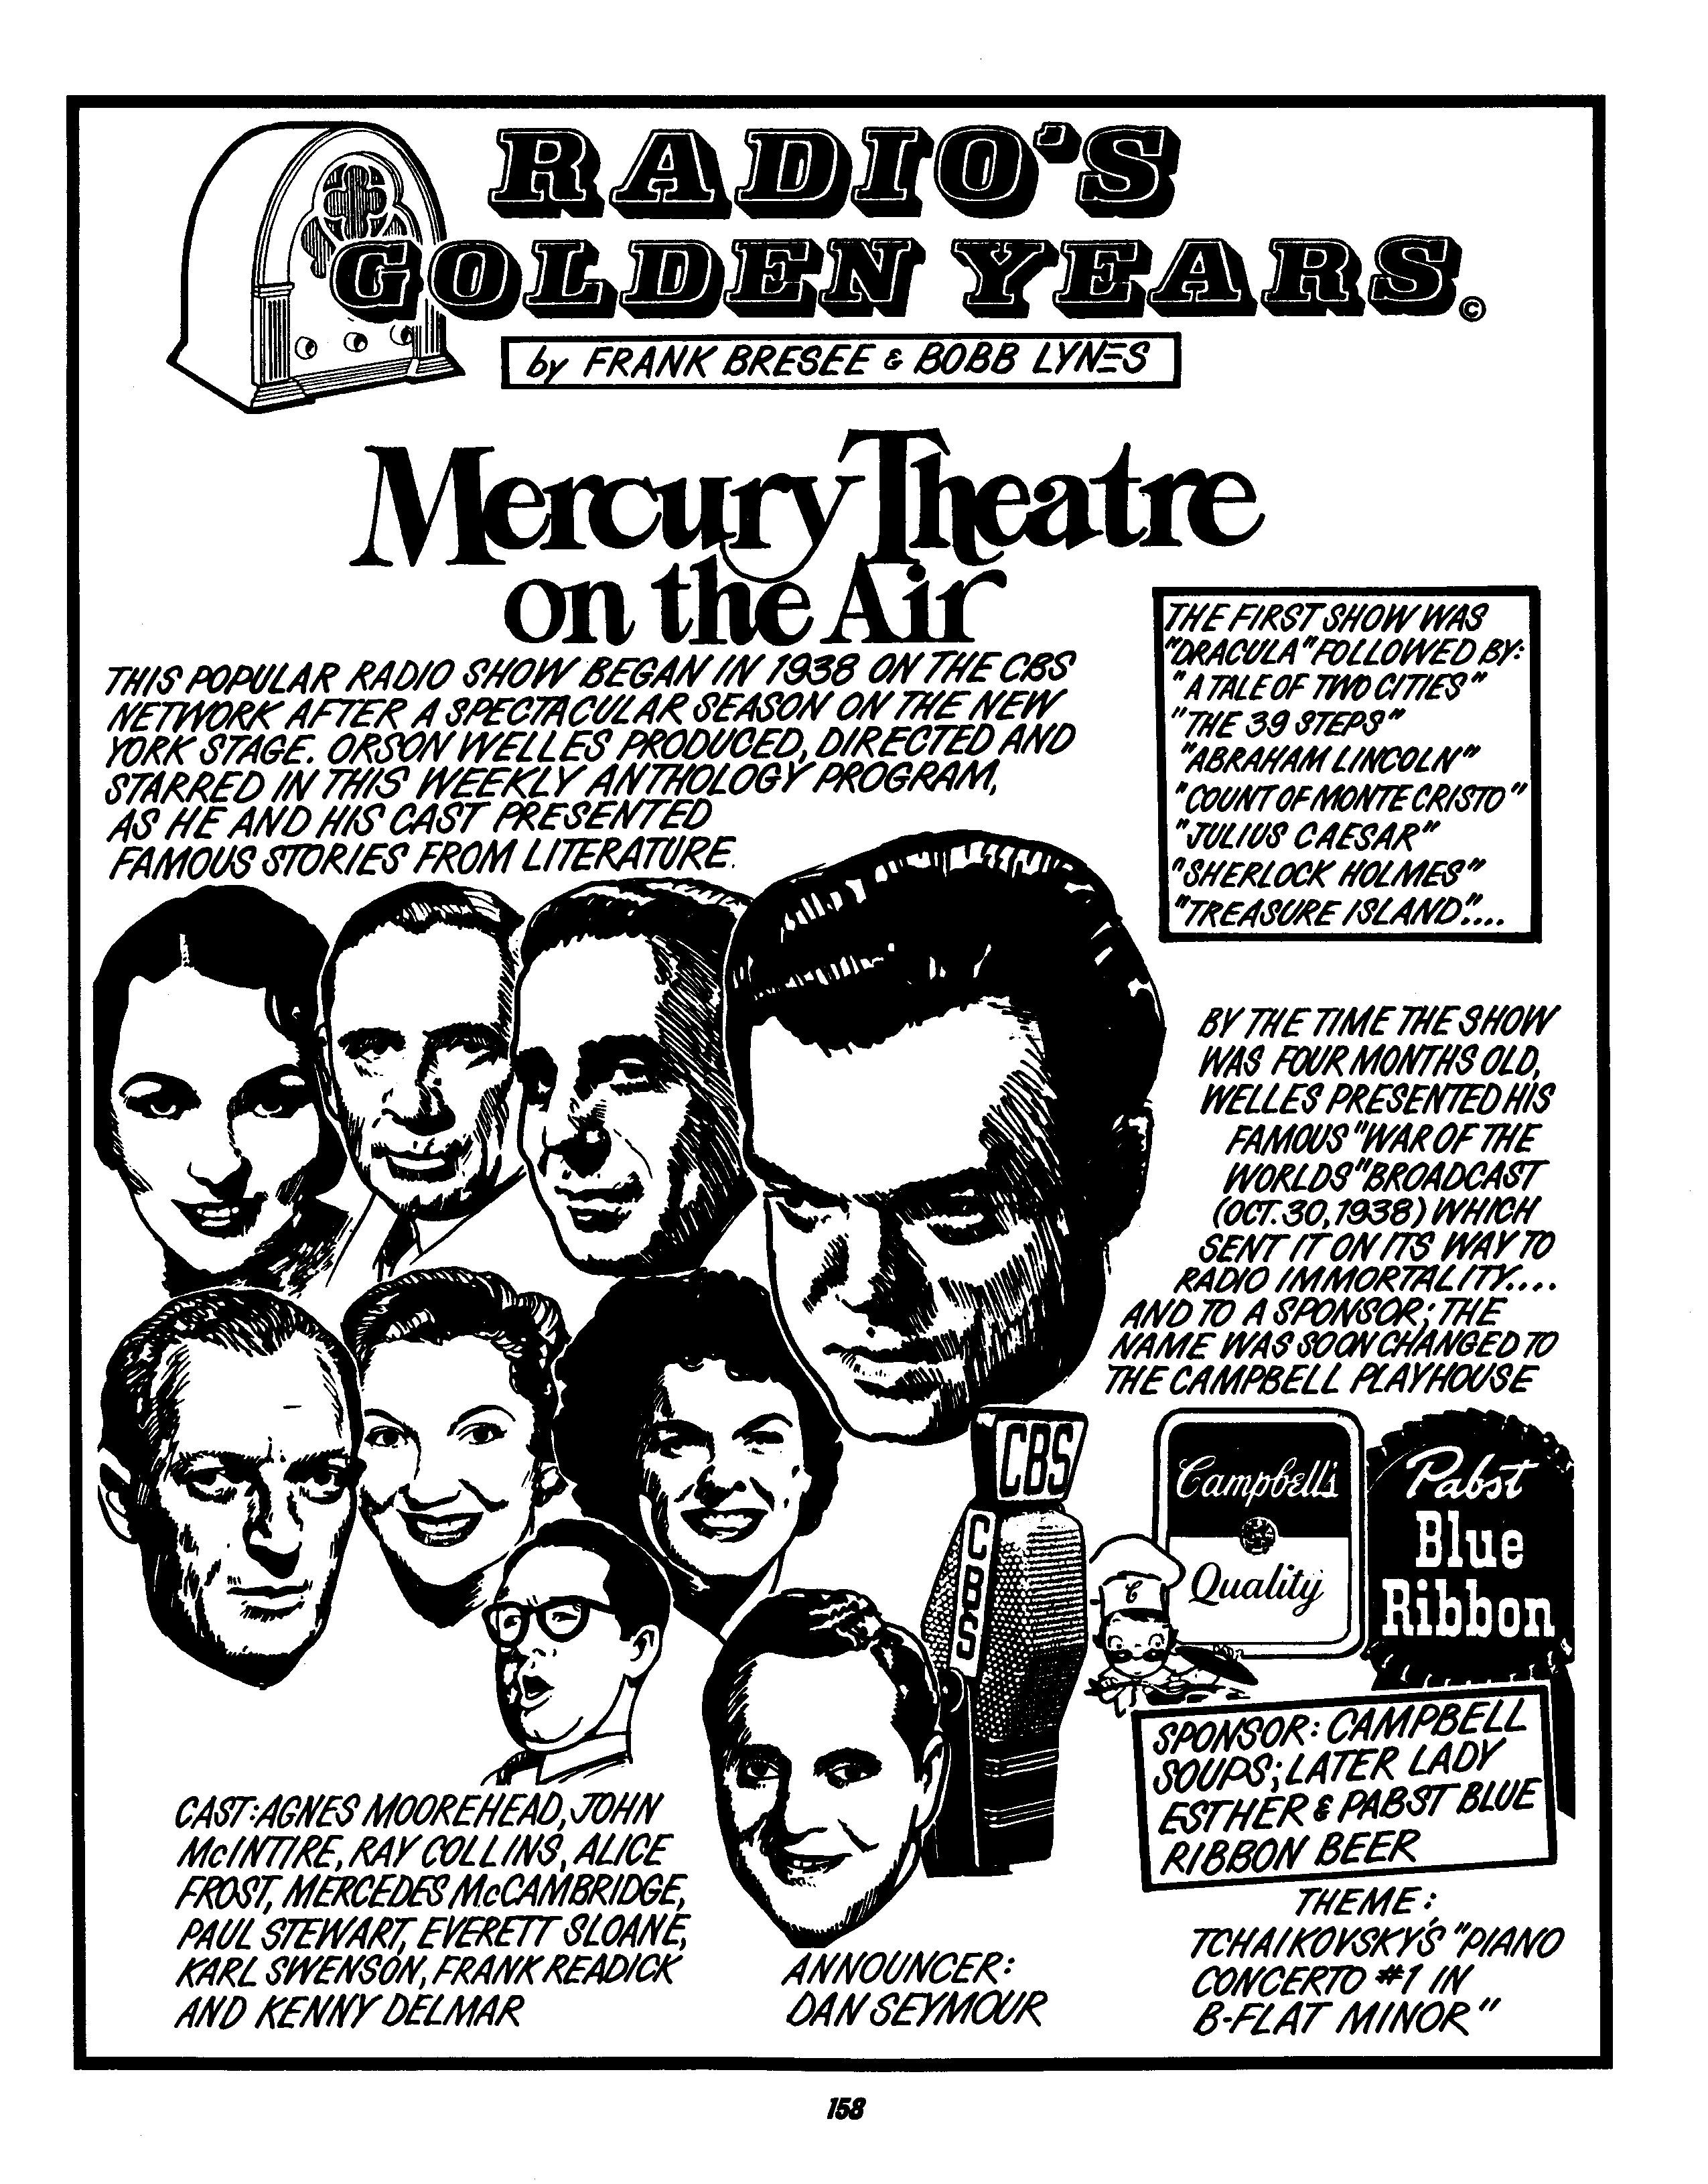 Mercury Theatre on the Air: Radio's Golden Years (1998) by Bobb Bresee and Frank Lynes